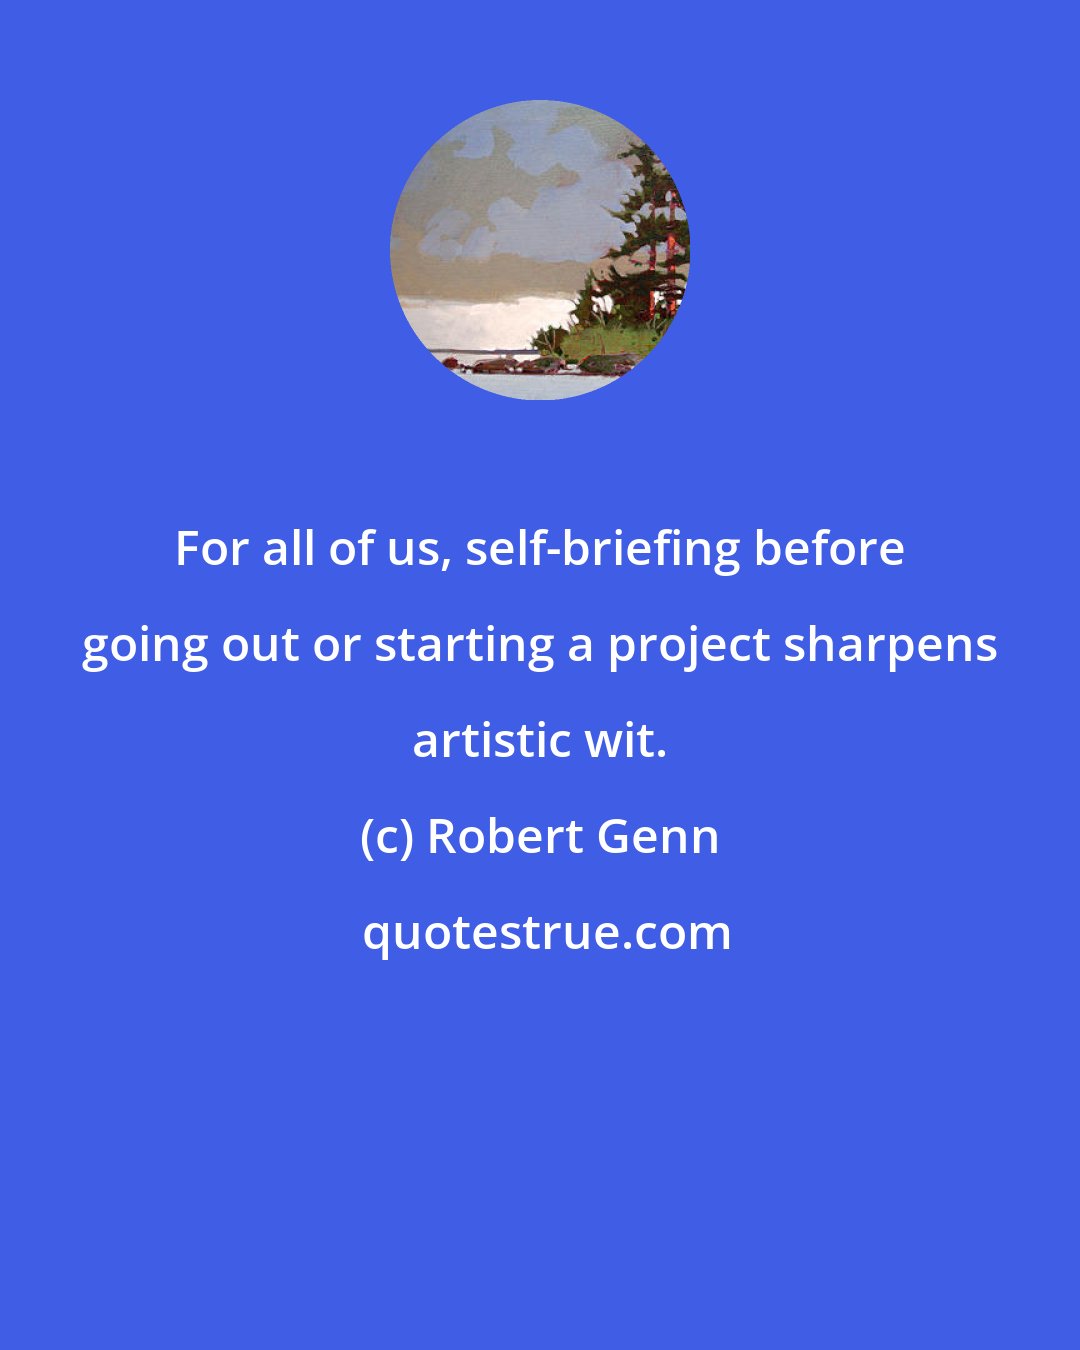 Robert Genn: For all of us, self-briefing before going out or starting a project sharpens artistic wit.